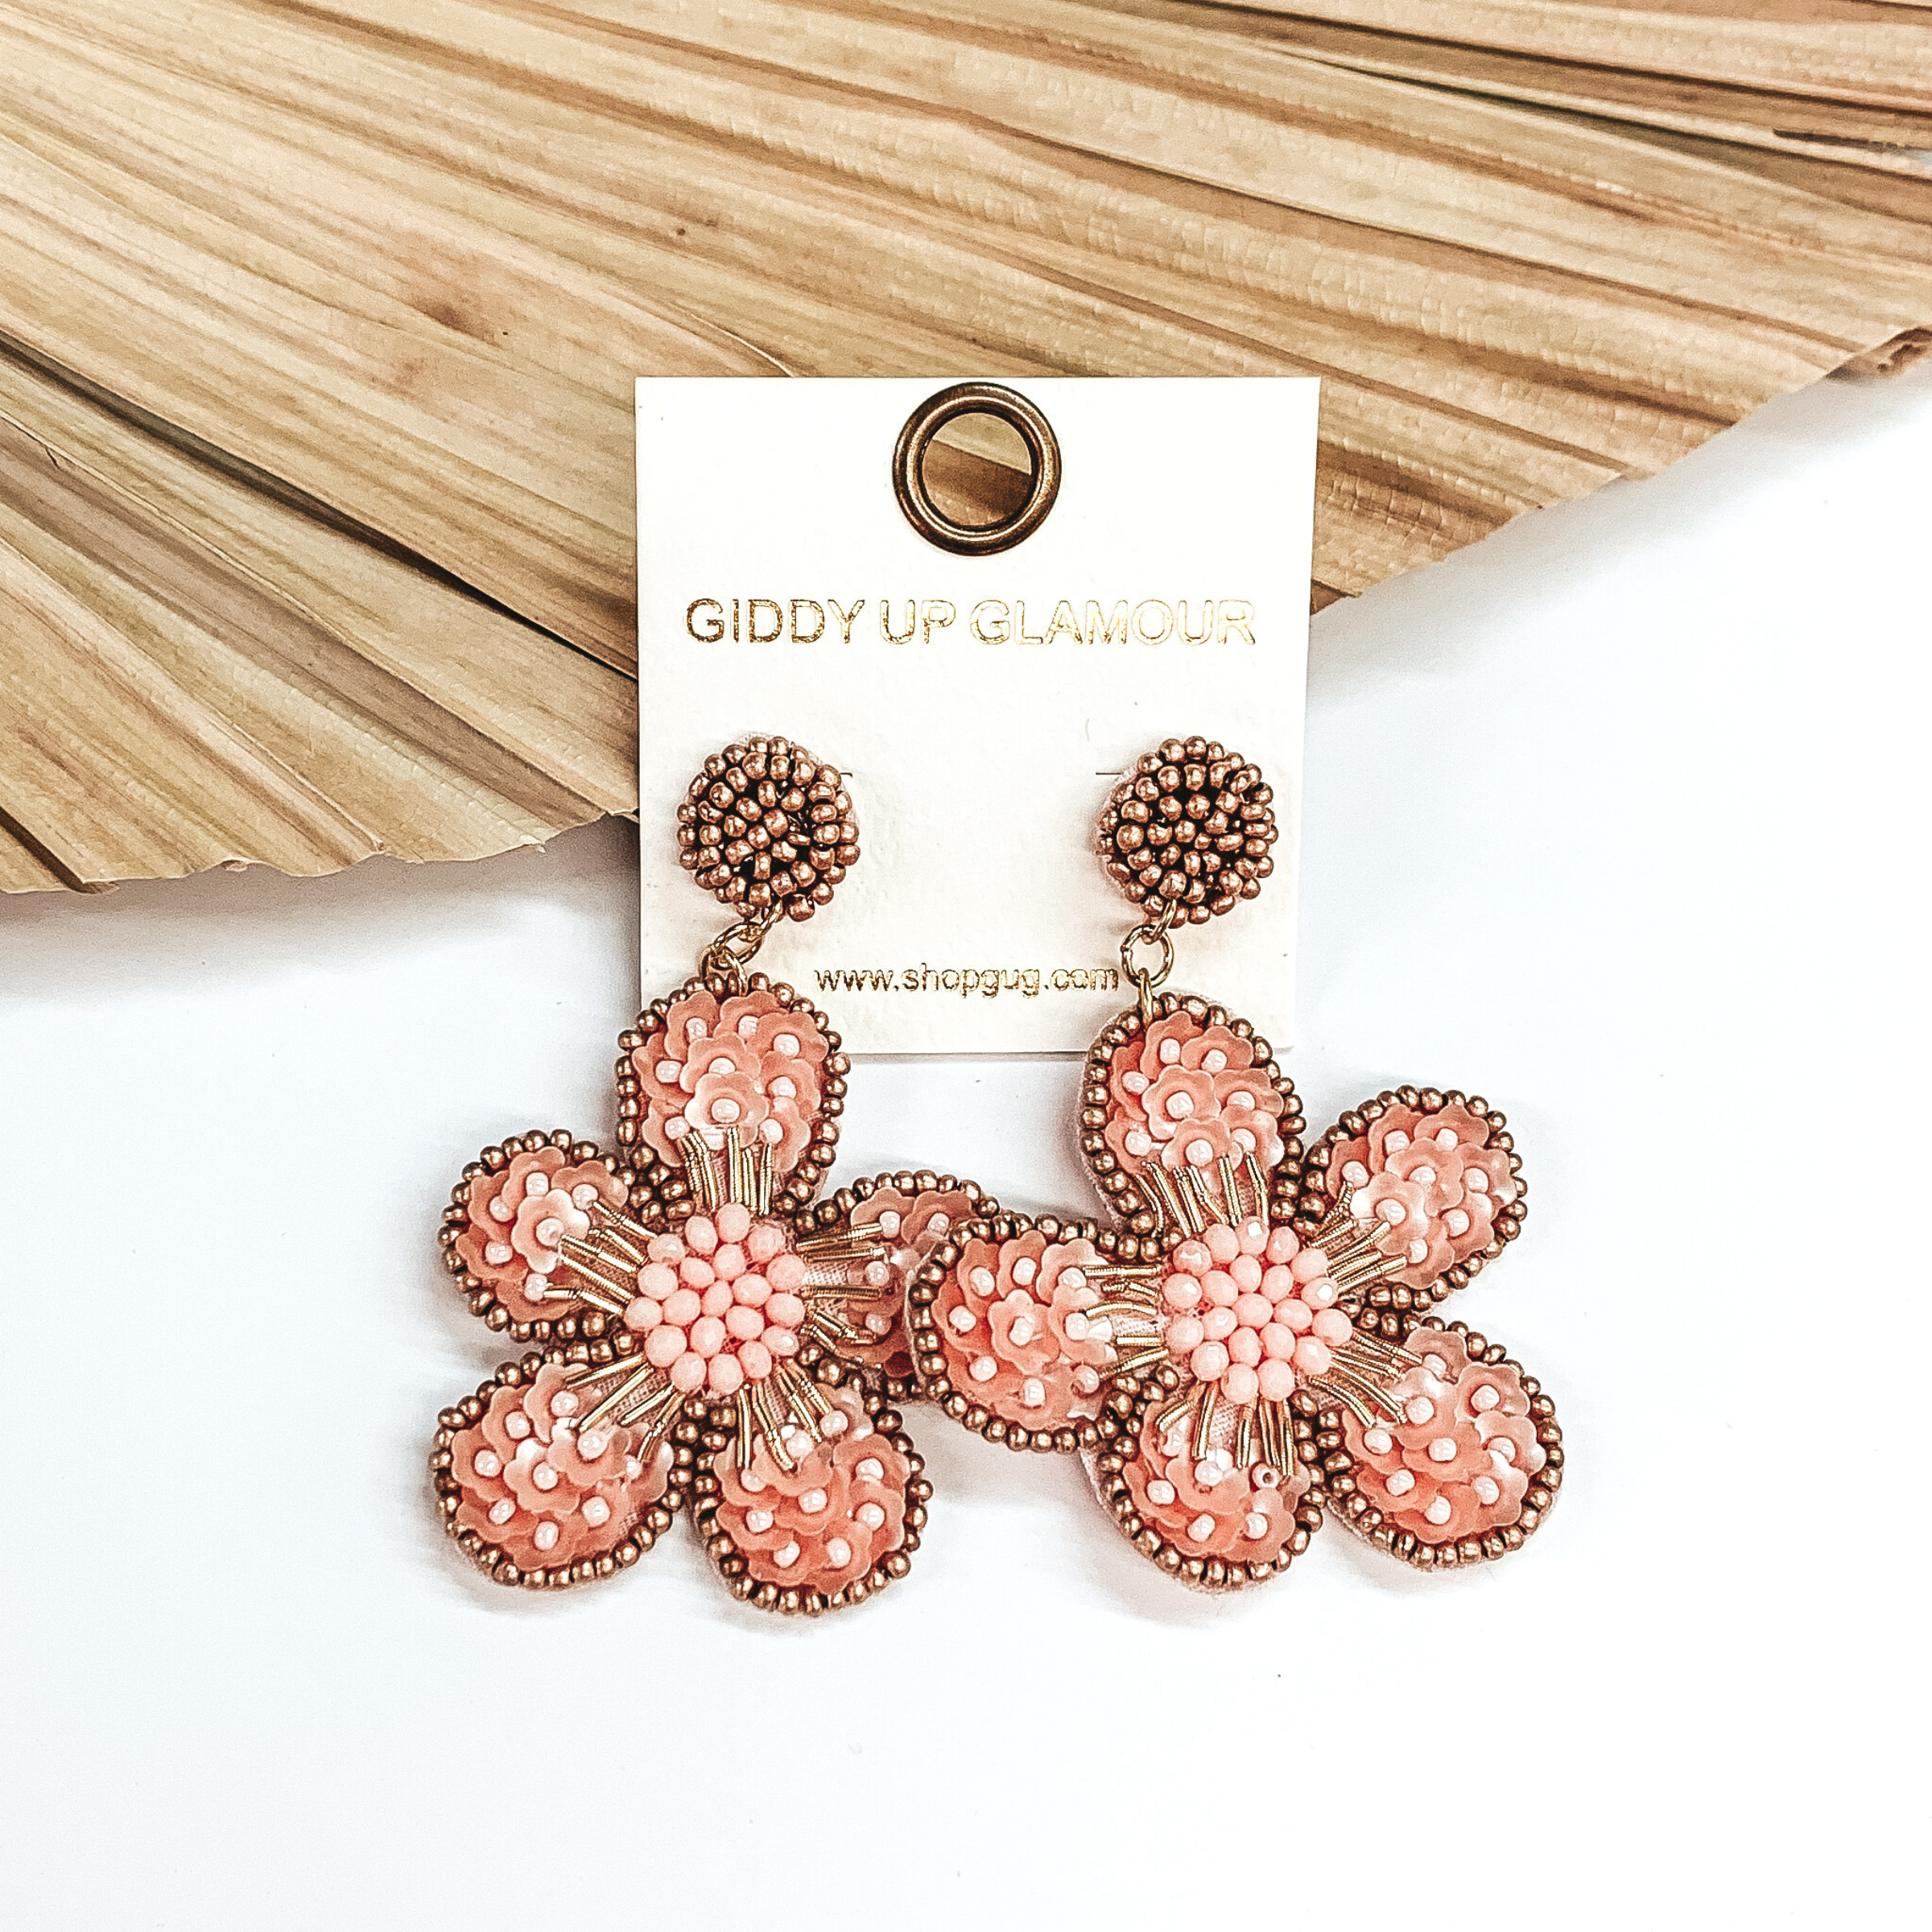 Gold beaded circle post back earrings. There is a hanging beaded flower pendant from the gold stud earrings. The flower pendant is baby pink with a gold outline and detailing. These earrings are pictured on a white background with a dried palm leaf in the background. 